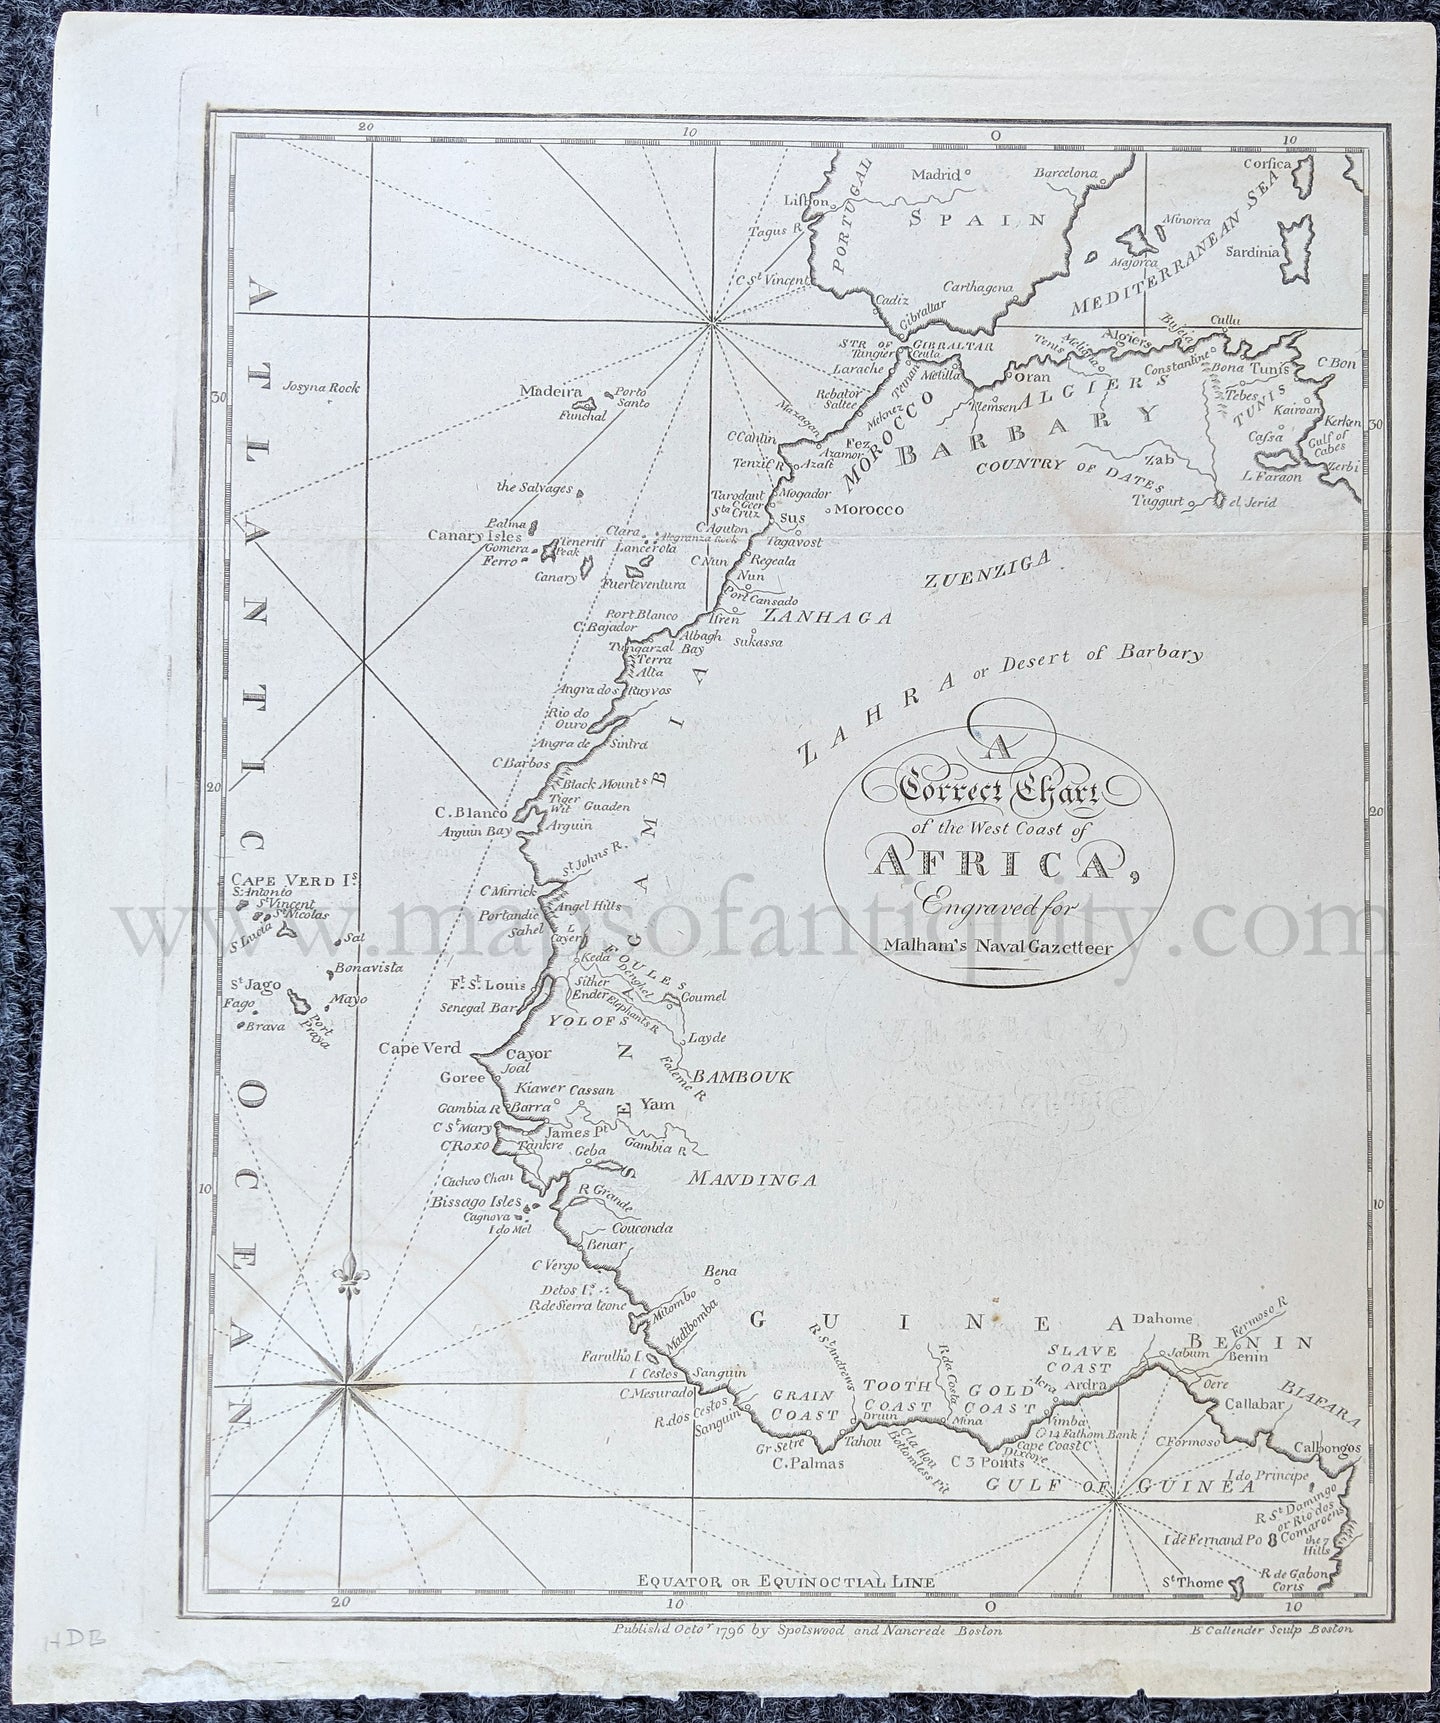 Genuine-Antique-Map-A-Correct-Chart-of-the-West-Coast-of-Africa-Engraved-for-Malham's-Naval-Gazetteer-Africa--1796-Malham-Maps-Of-Antiquity-1800s-19th-century